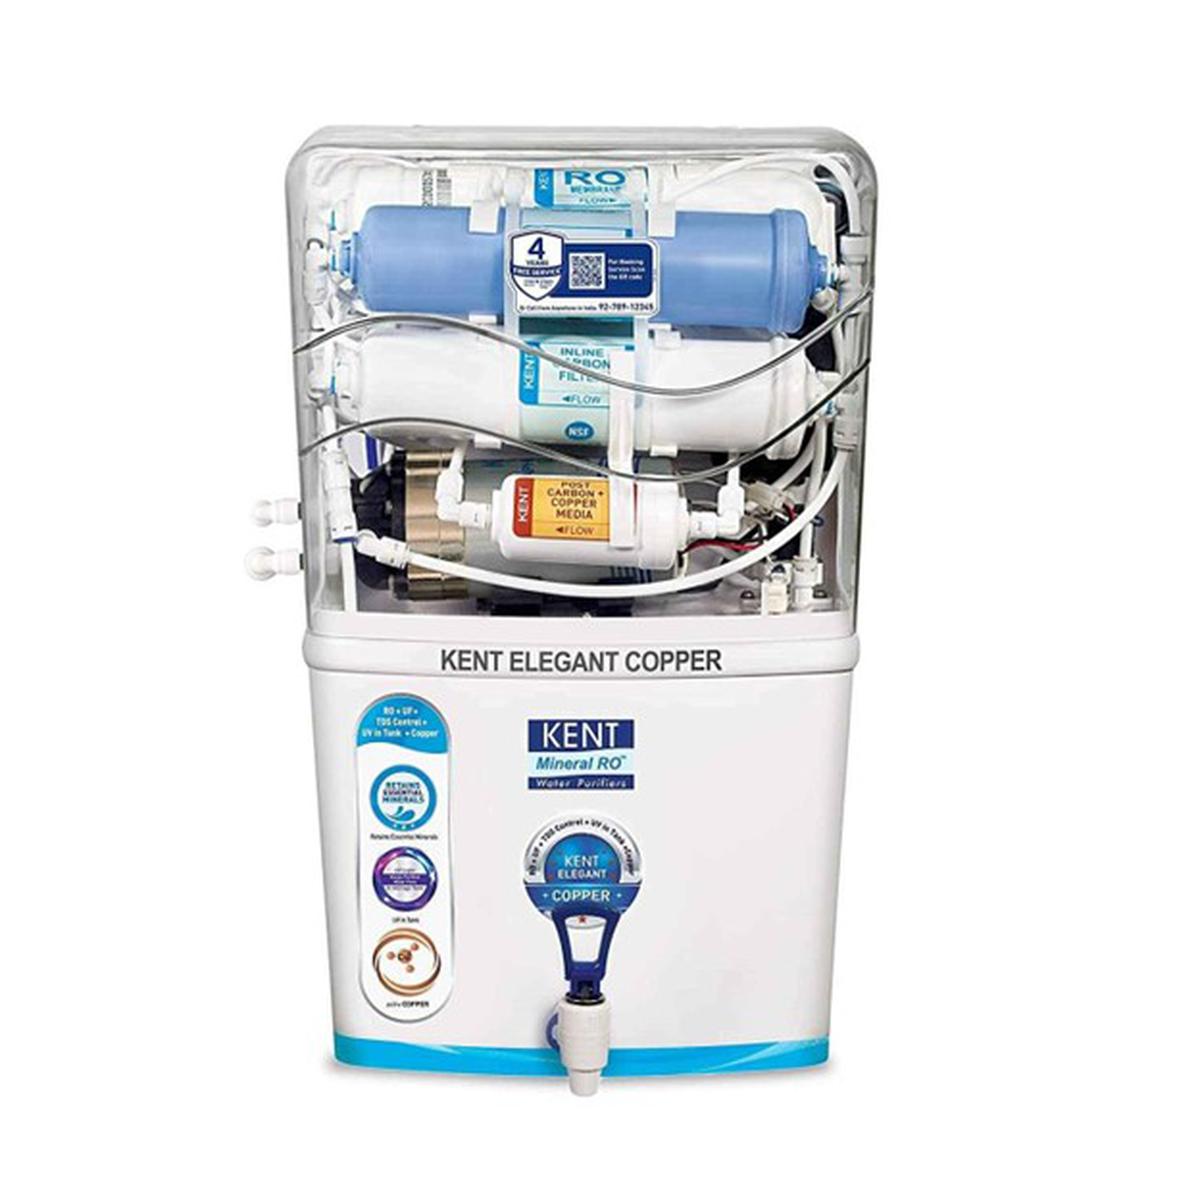 How KENT Water Purifiers Can Help You Live a Better Healthy Life